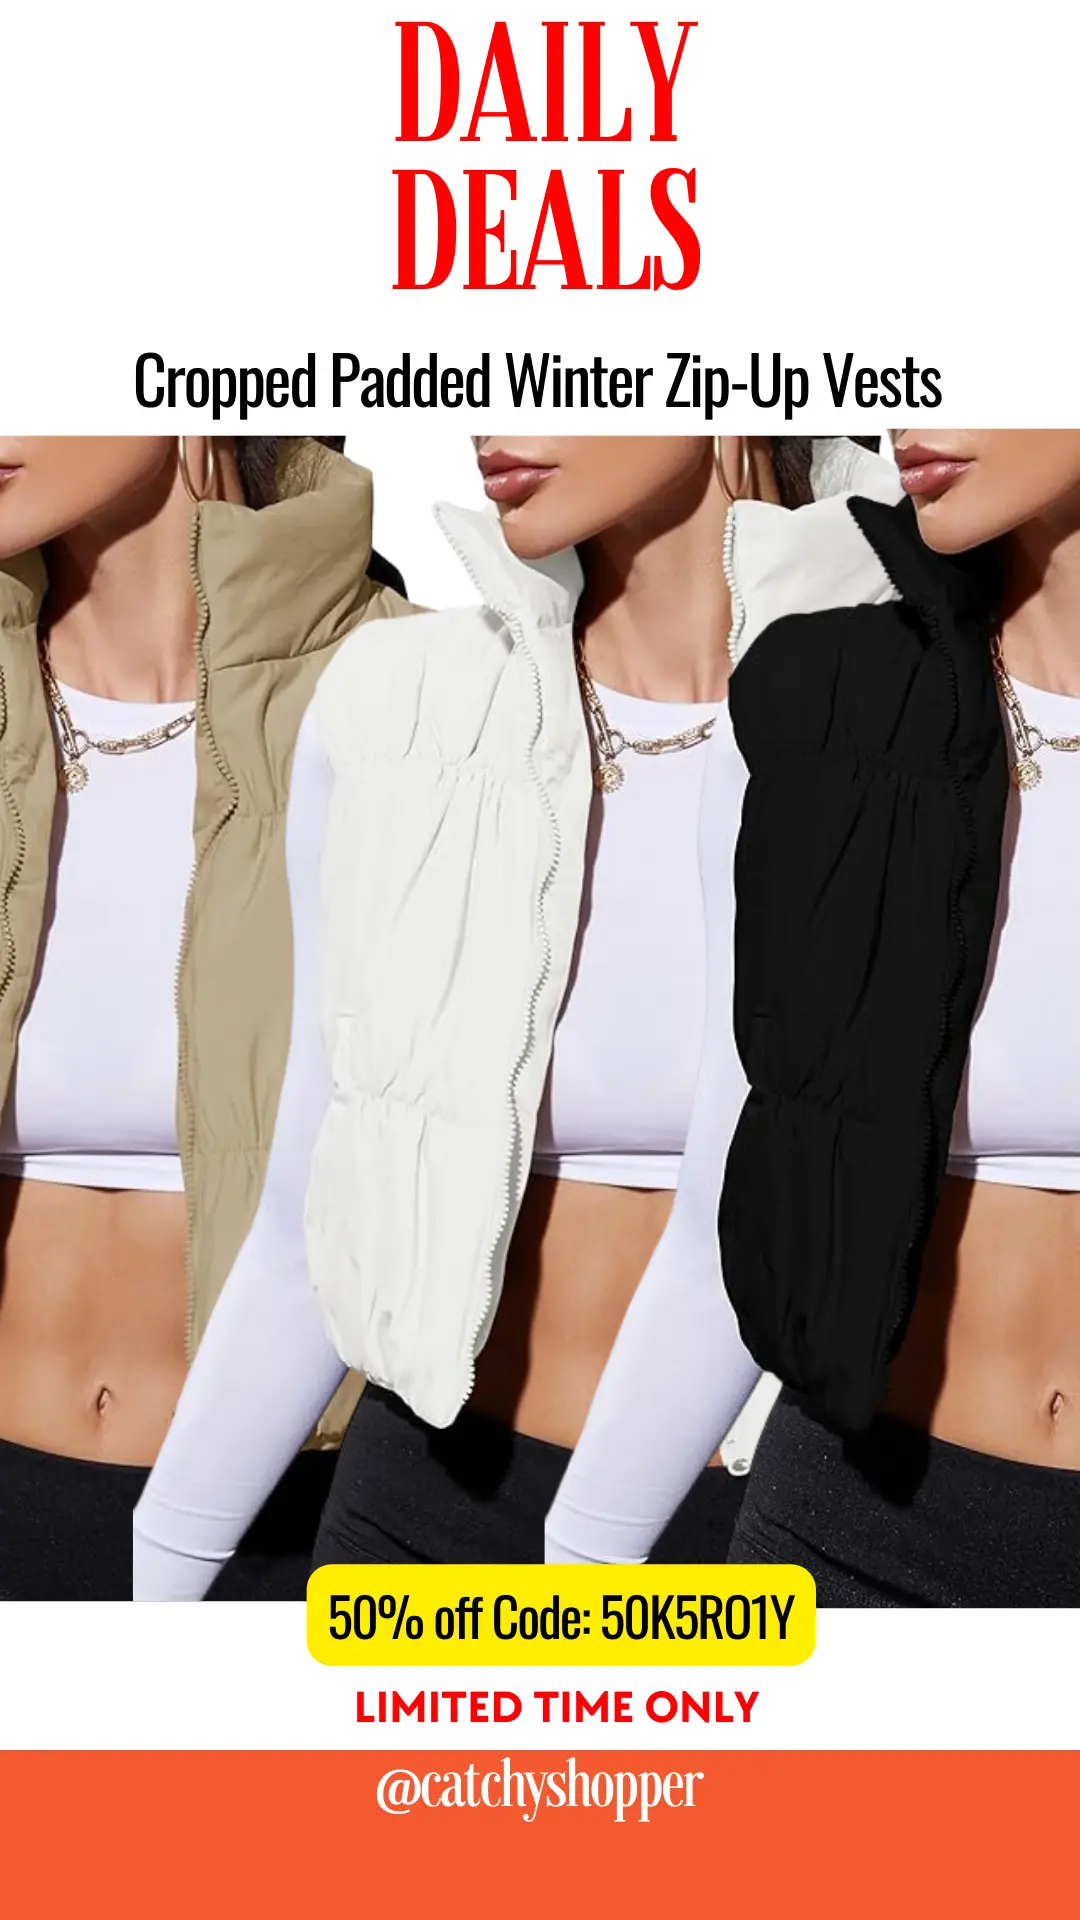 Cropped Padded Winter Zip-Up Vests